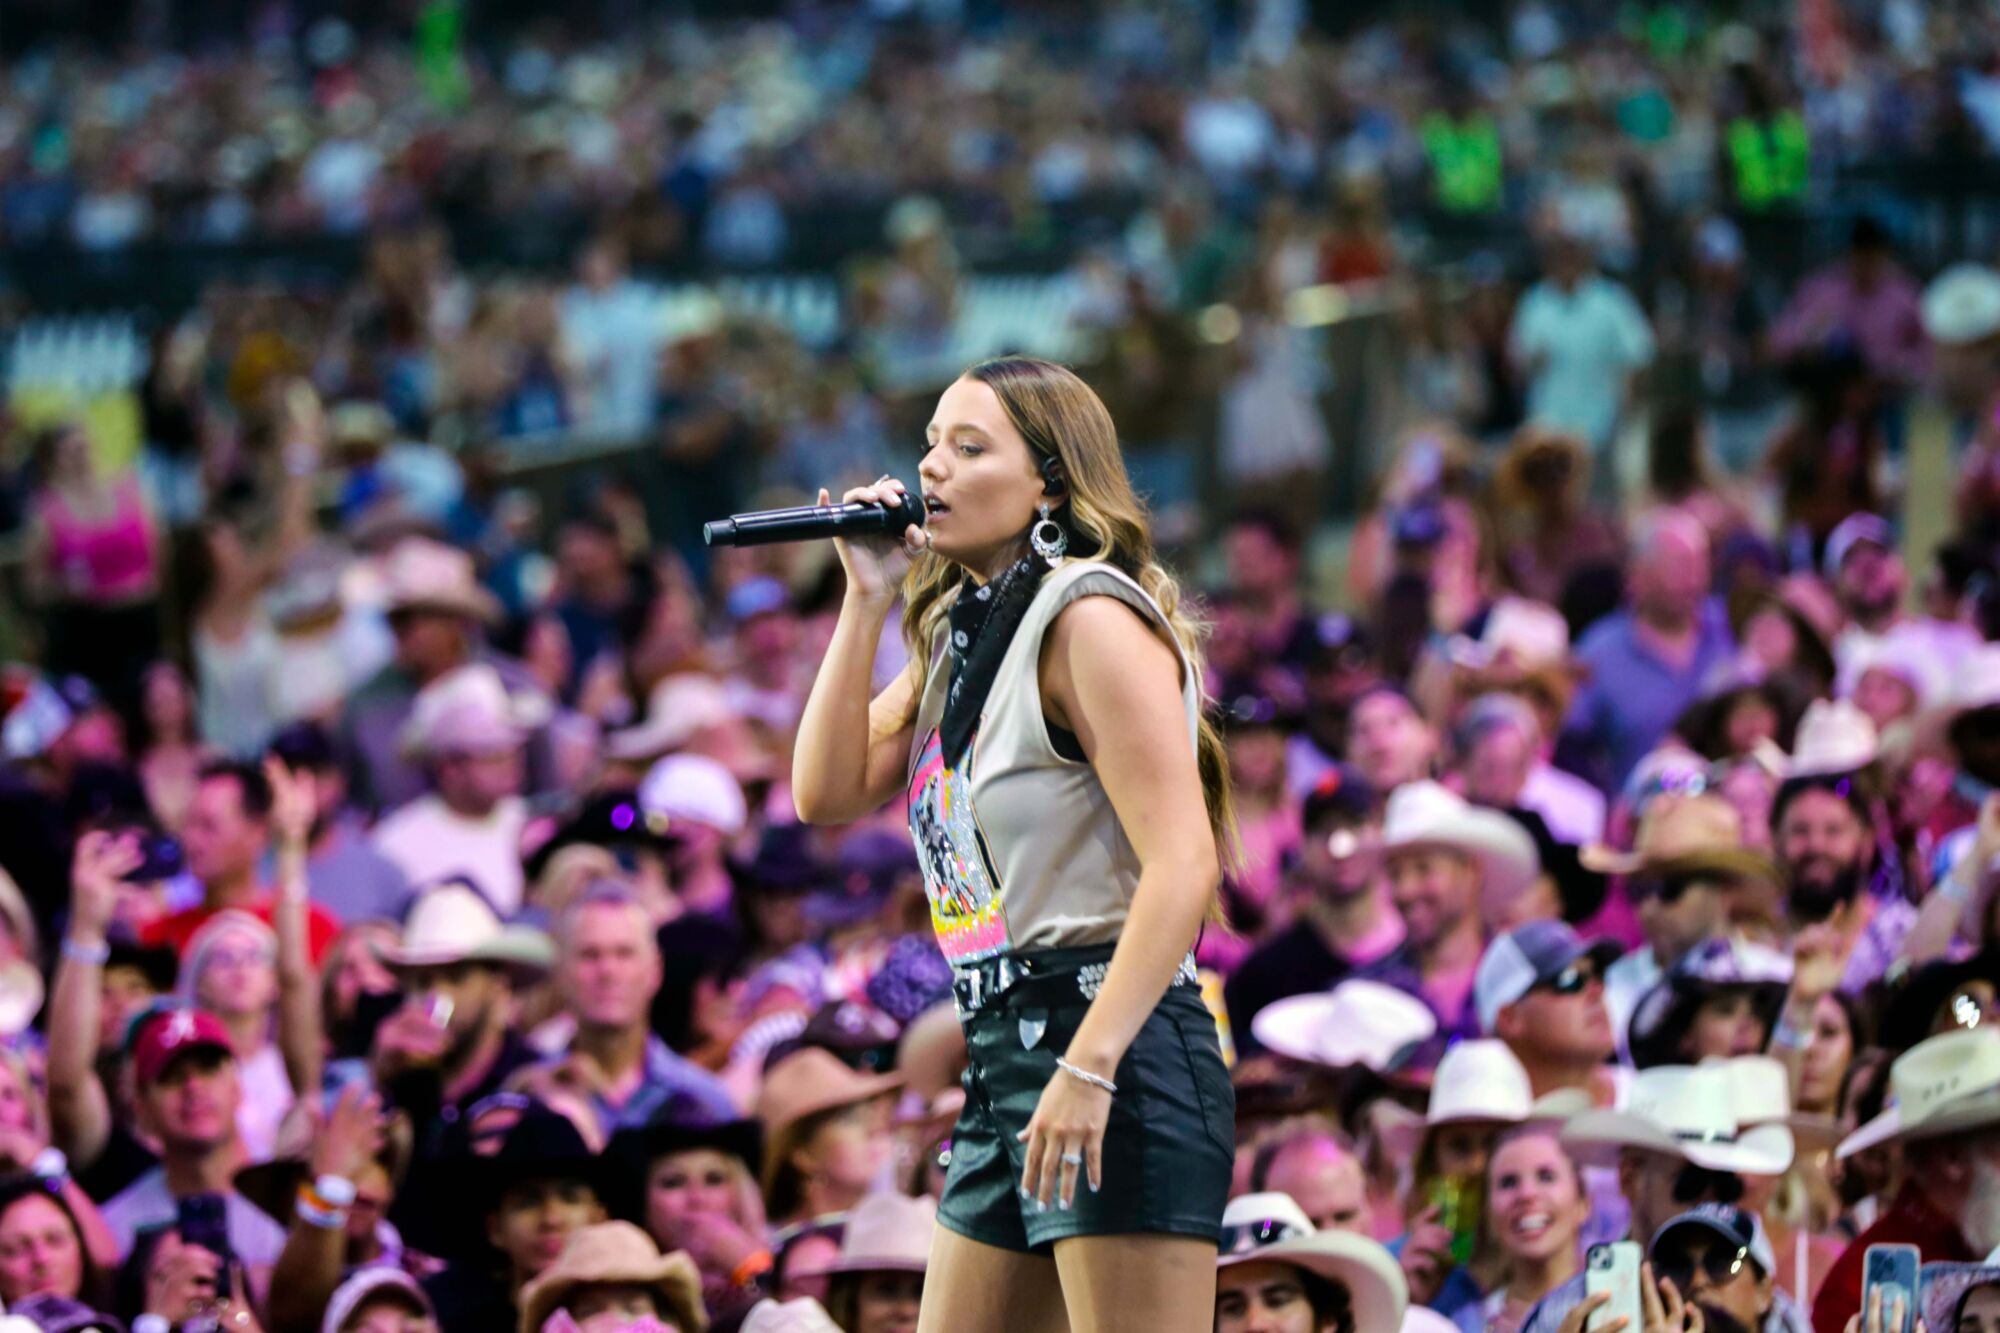 A woman sings into a microphone while a crowd is behind her.